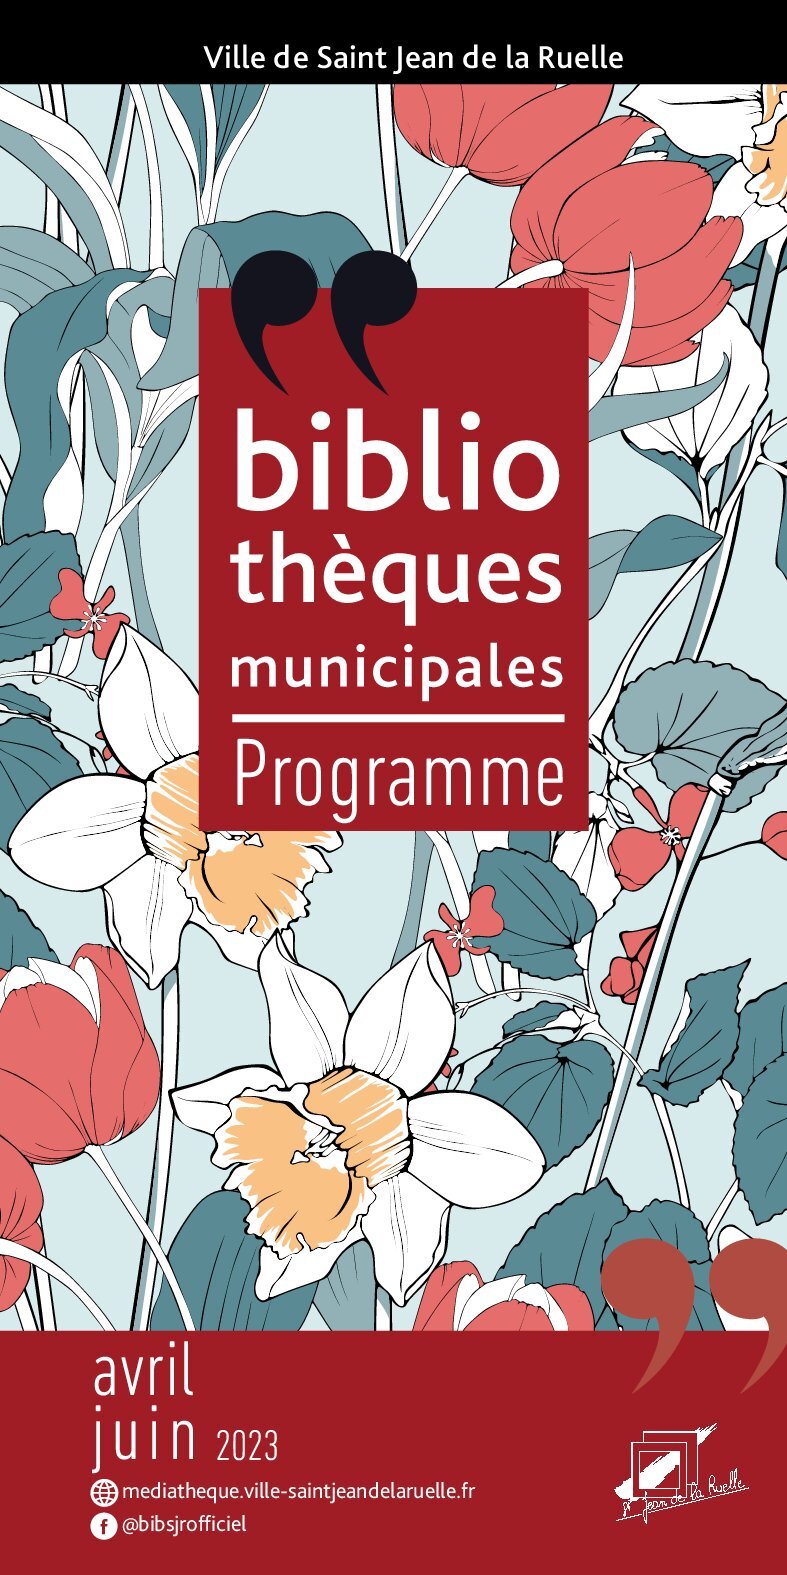 programme bibliotheques avril juin 2023 00001